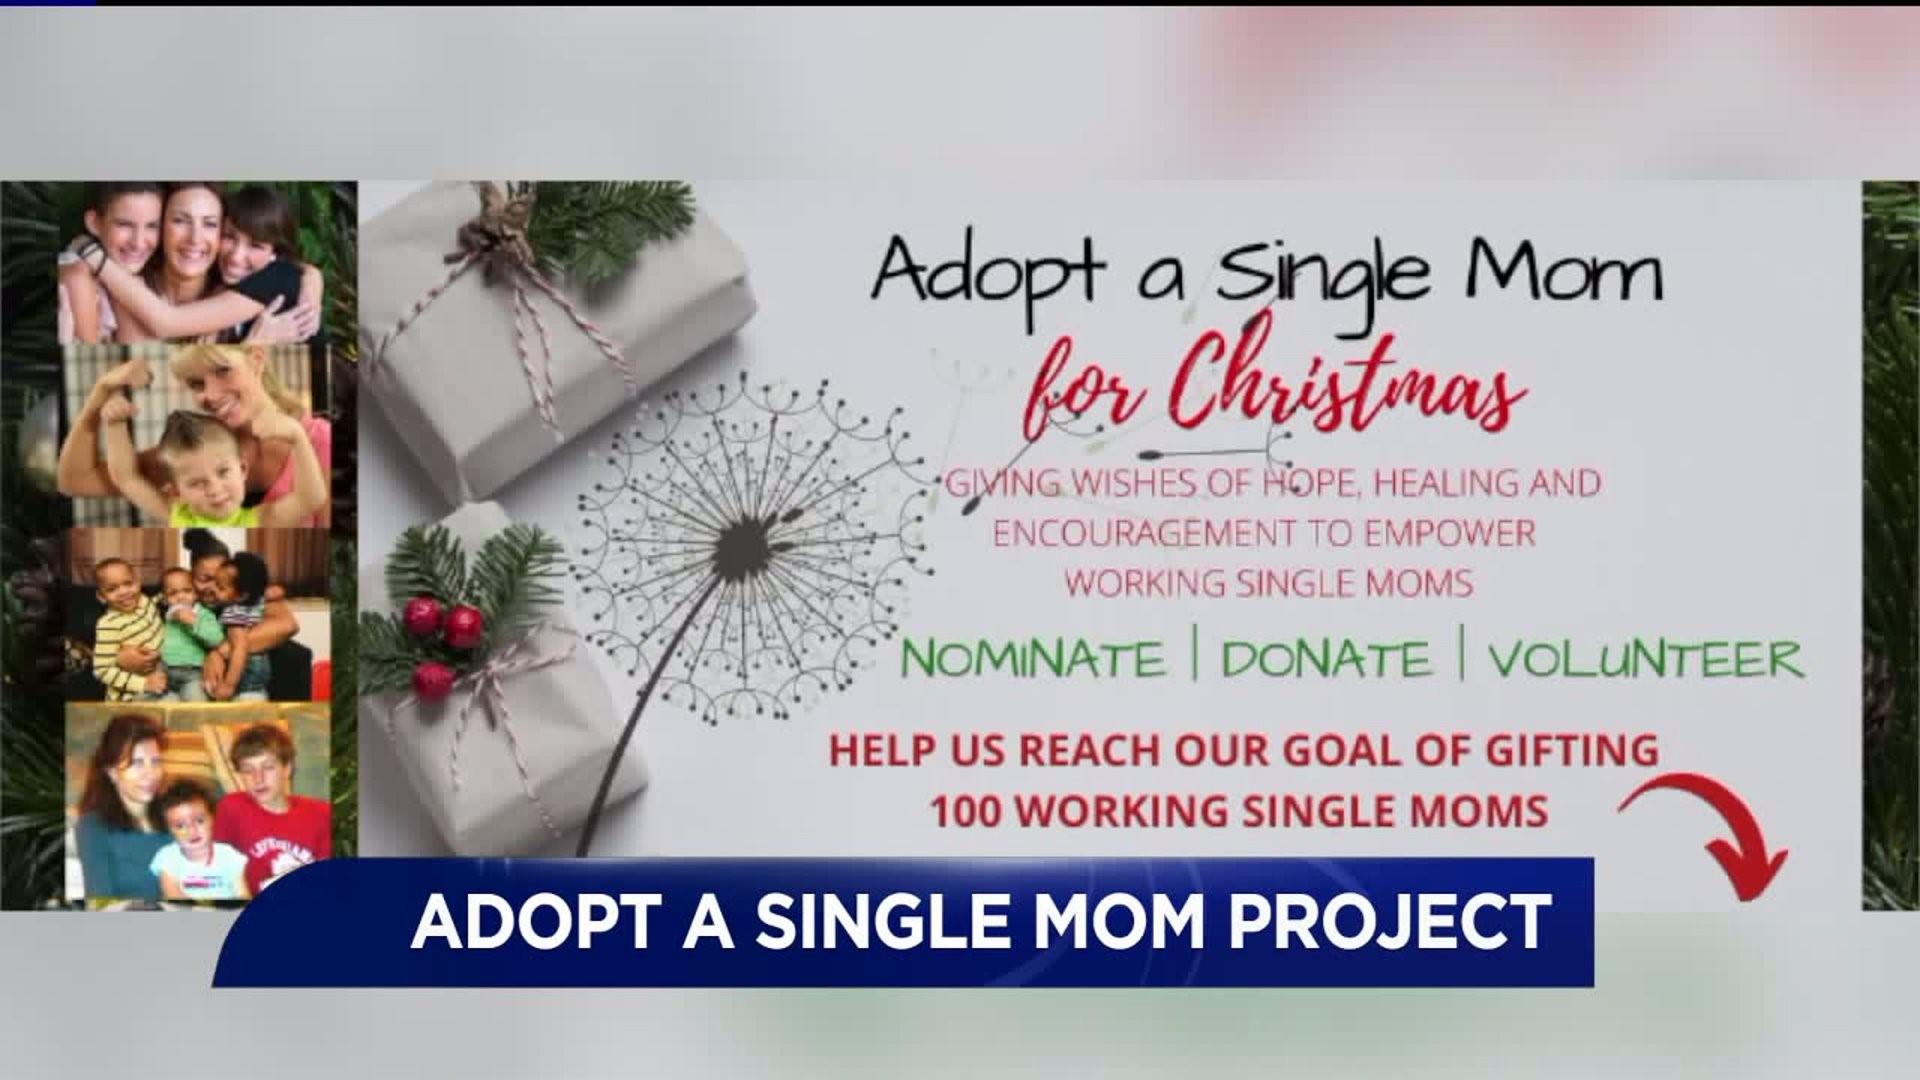 Adopt A Single Mom Project